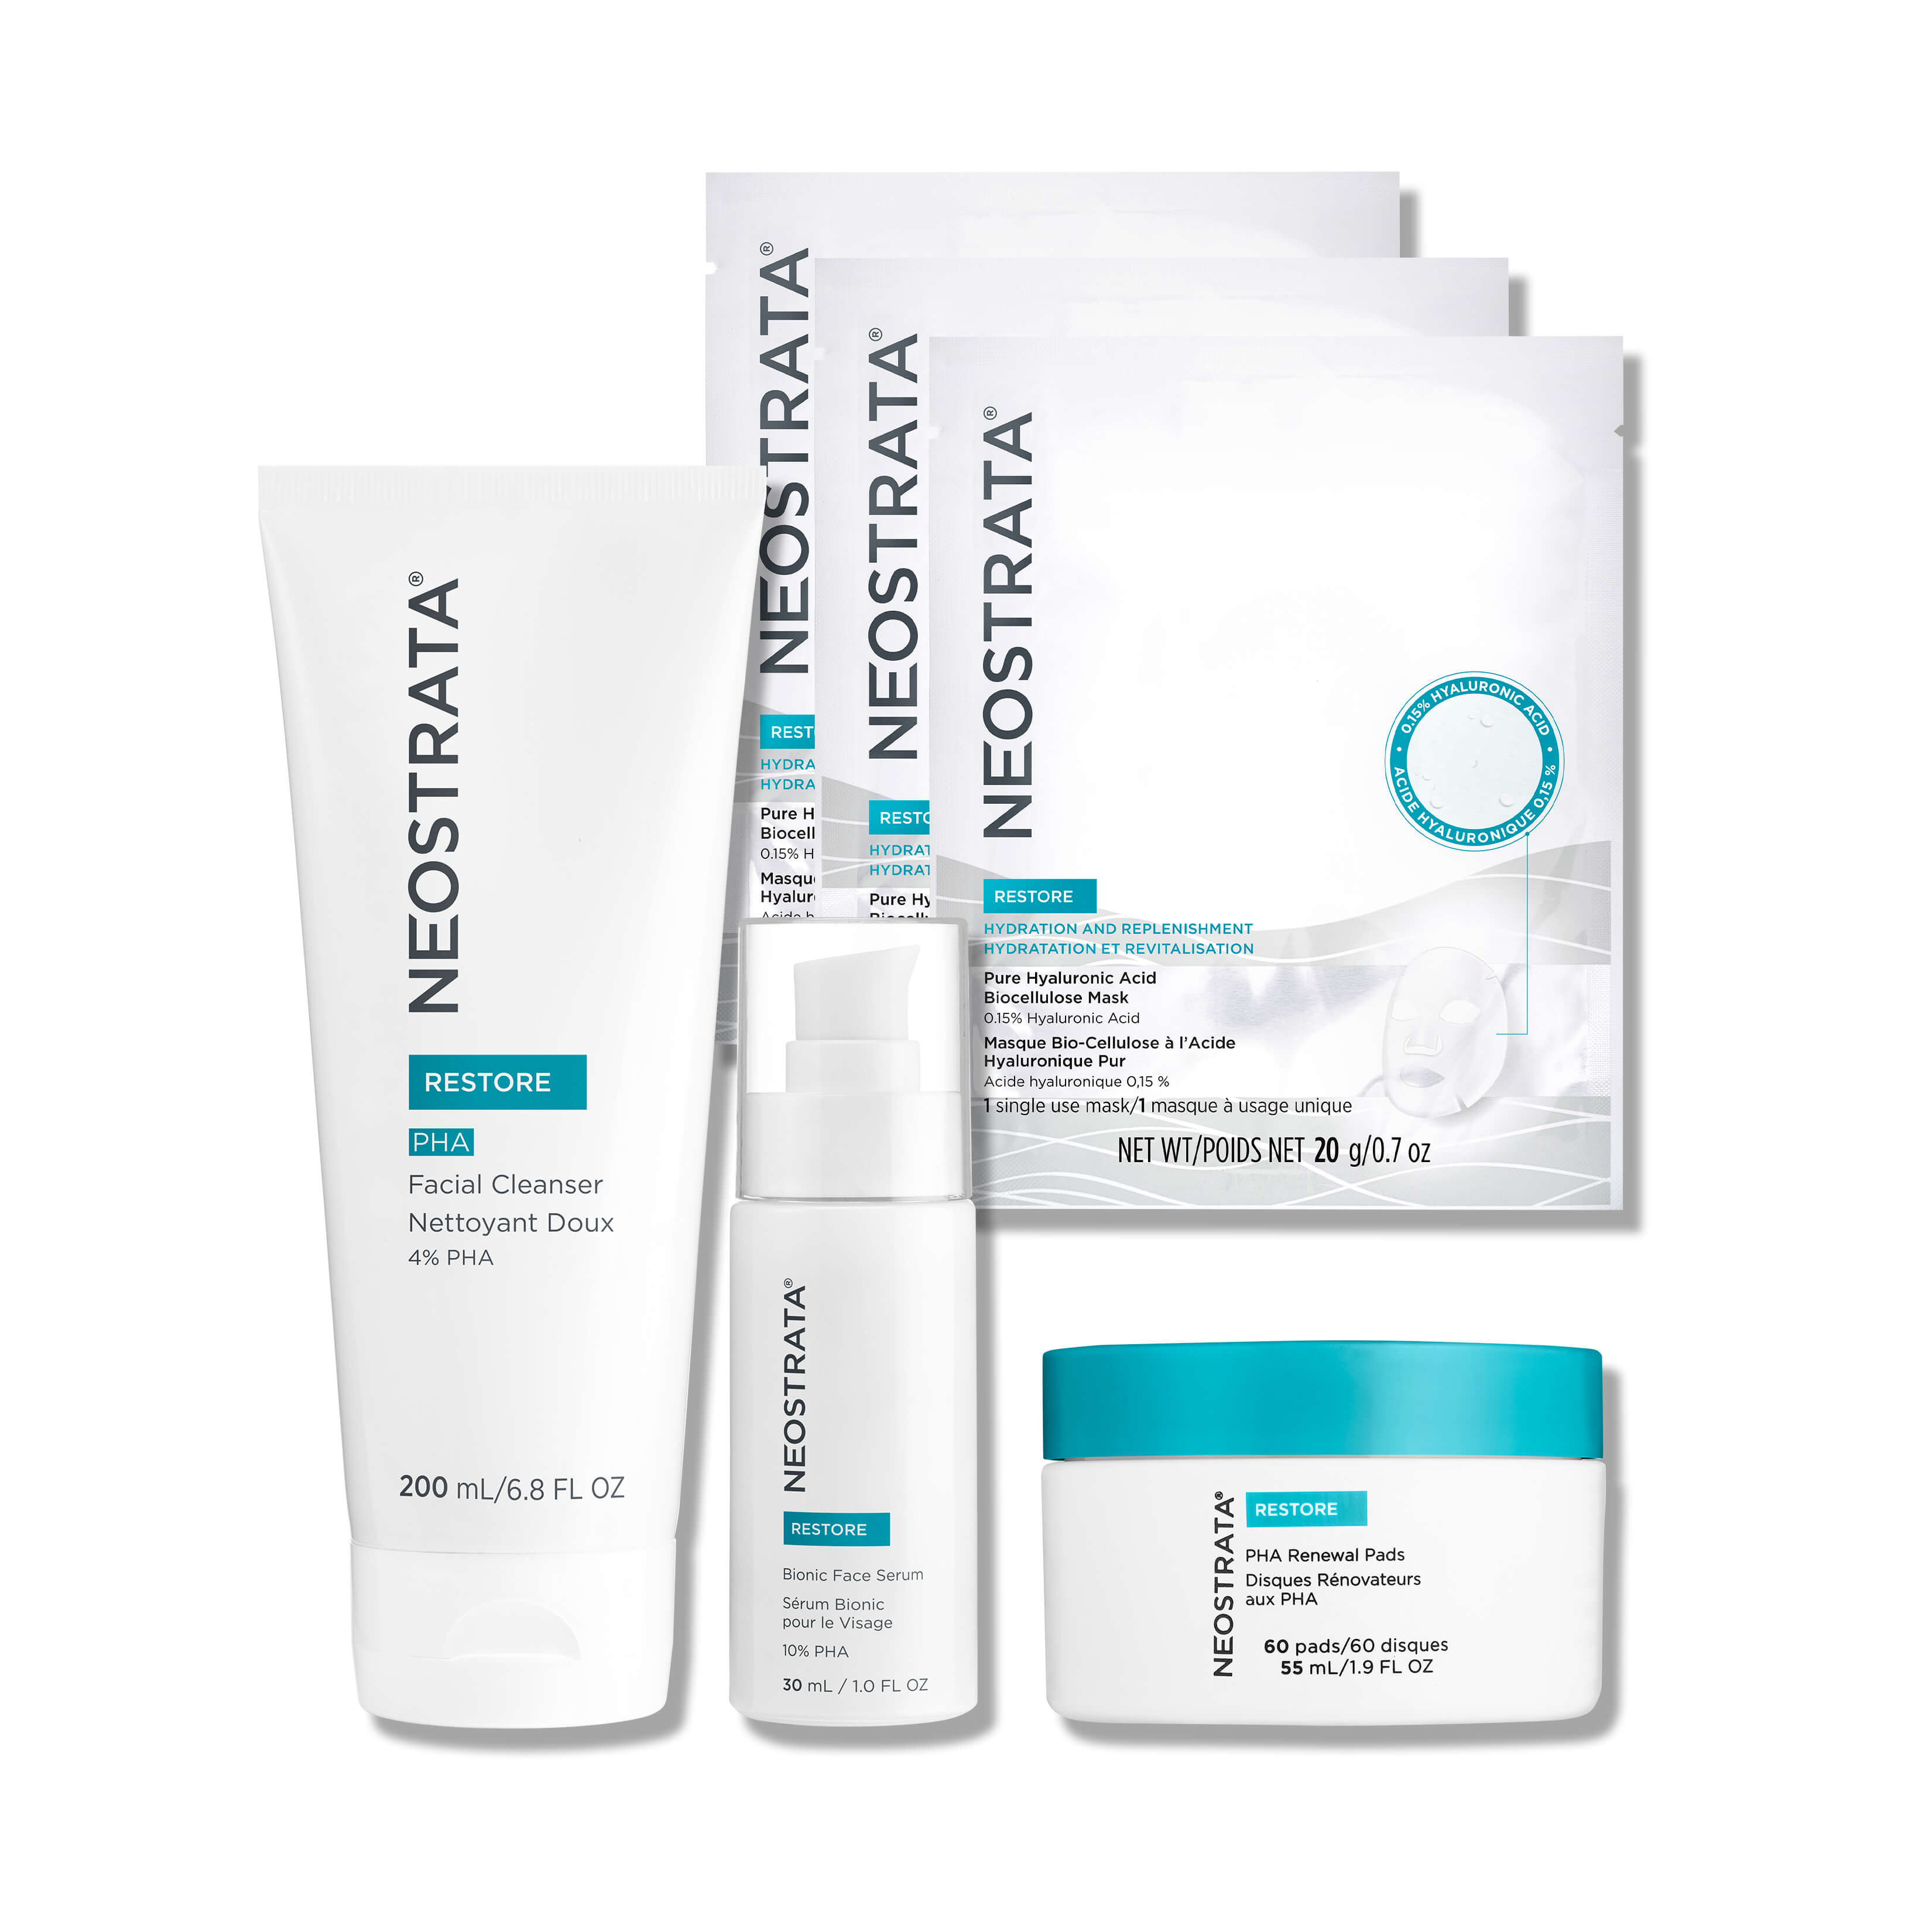 NeoStrata Gentle Yet Powerful Skincare Heroes | Get Set To Prep! Cleanse, Prep & Treat Your Skin With This Ultimate Set From Our Restore Collection | 